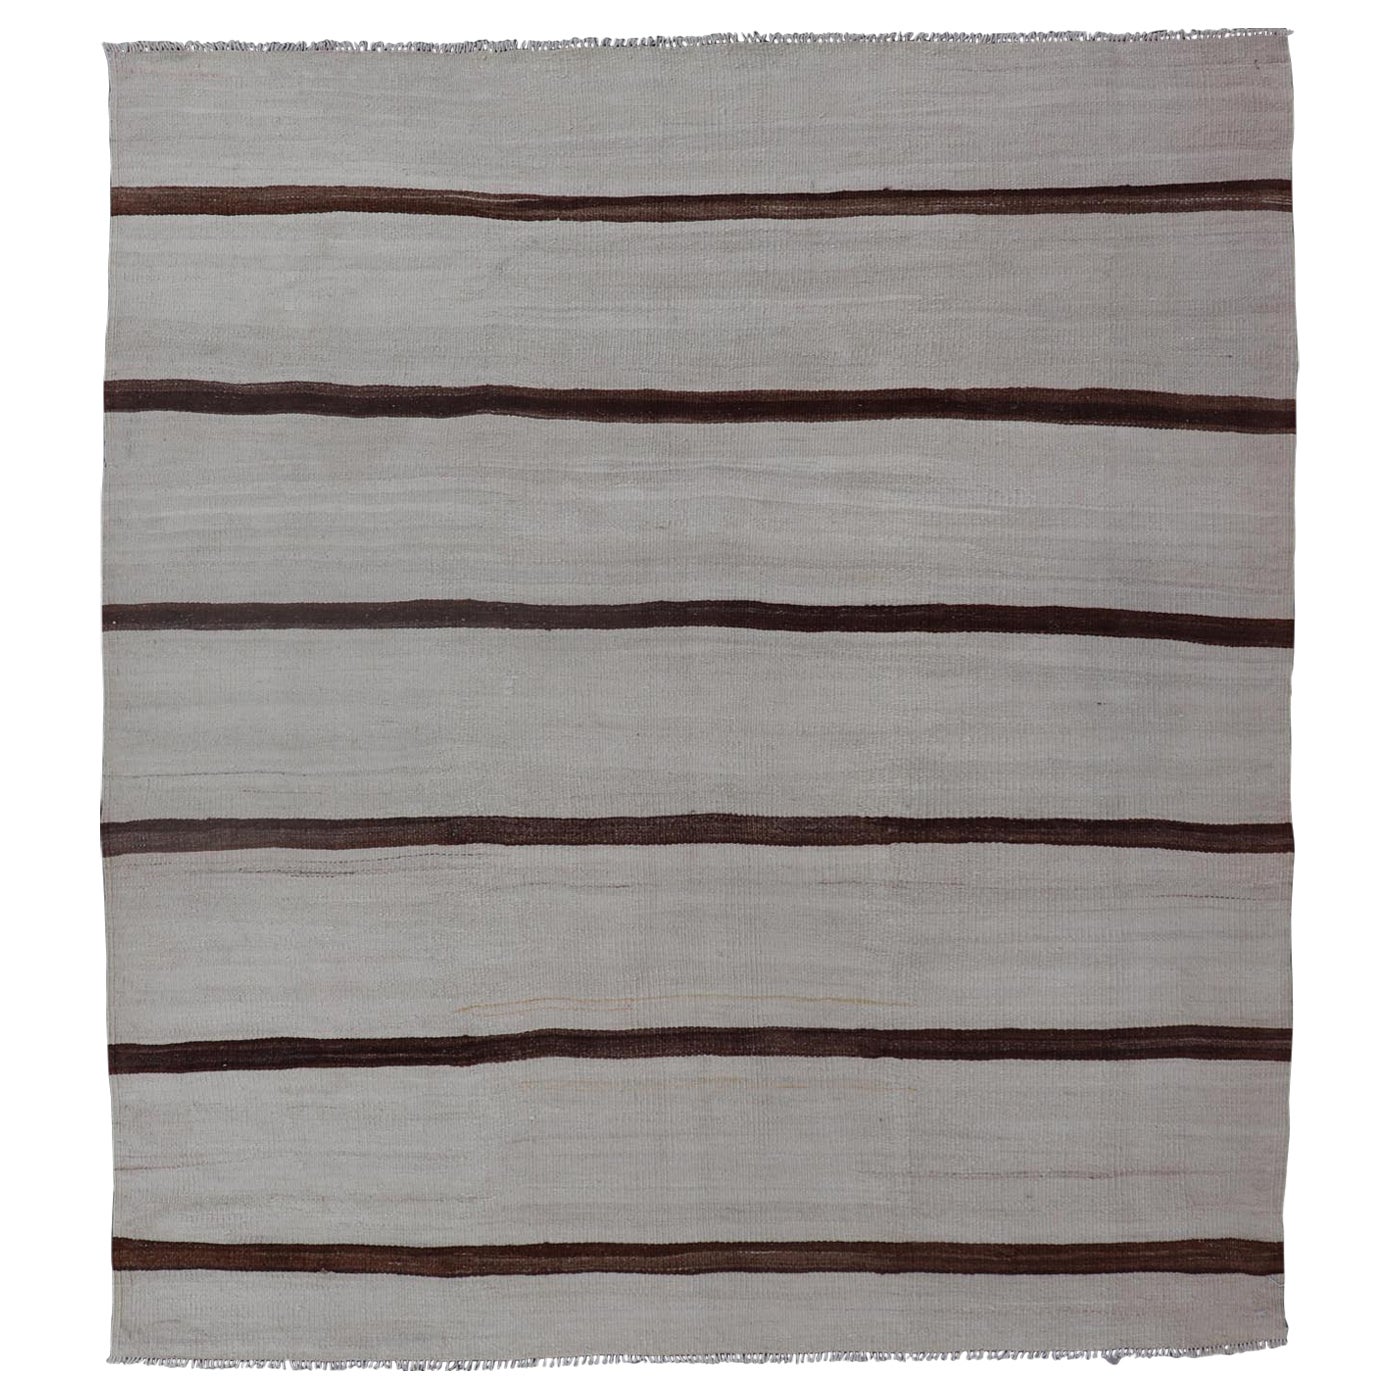 Turkish Vintage Kilim in Shades of Brown and Ivory with Stripe Design For Sale